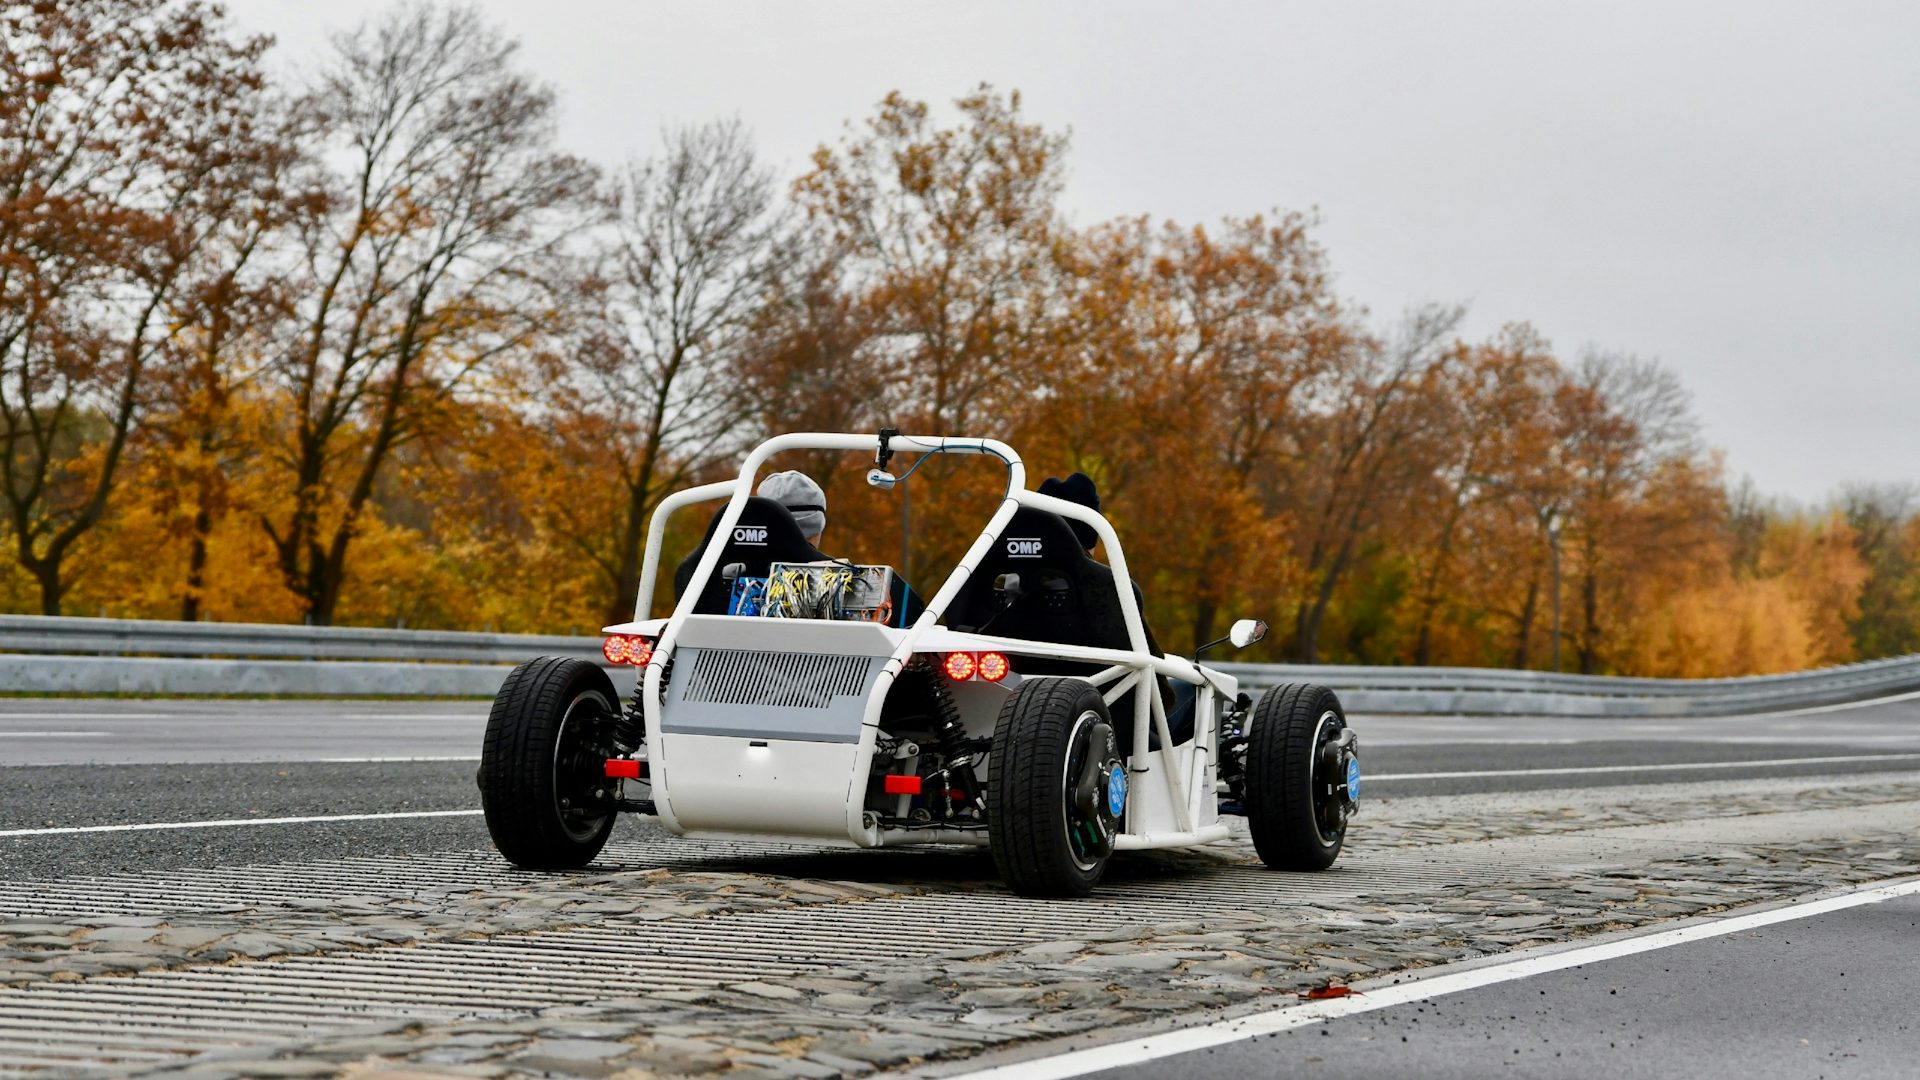 An open-topped car driving on an empty road